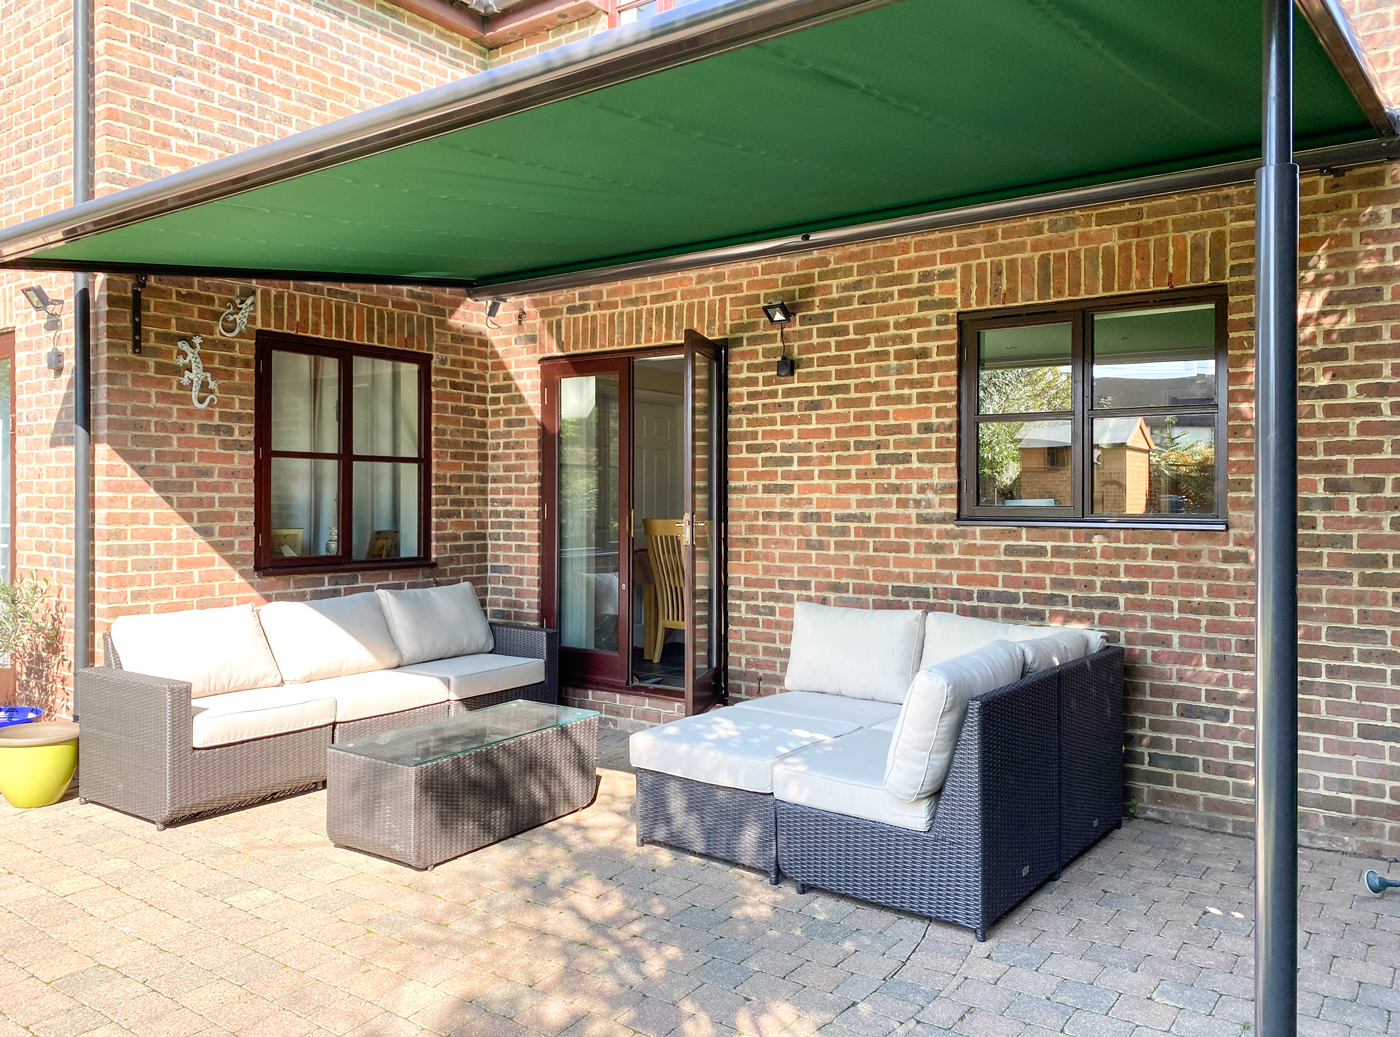 Markilux Fully Automated Pergola Finished in Green